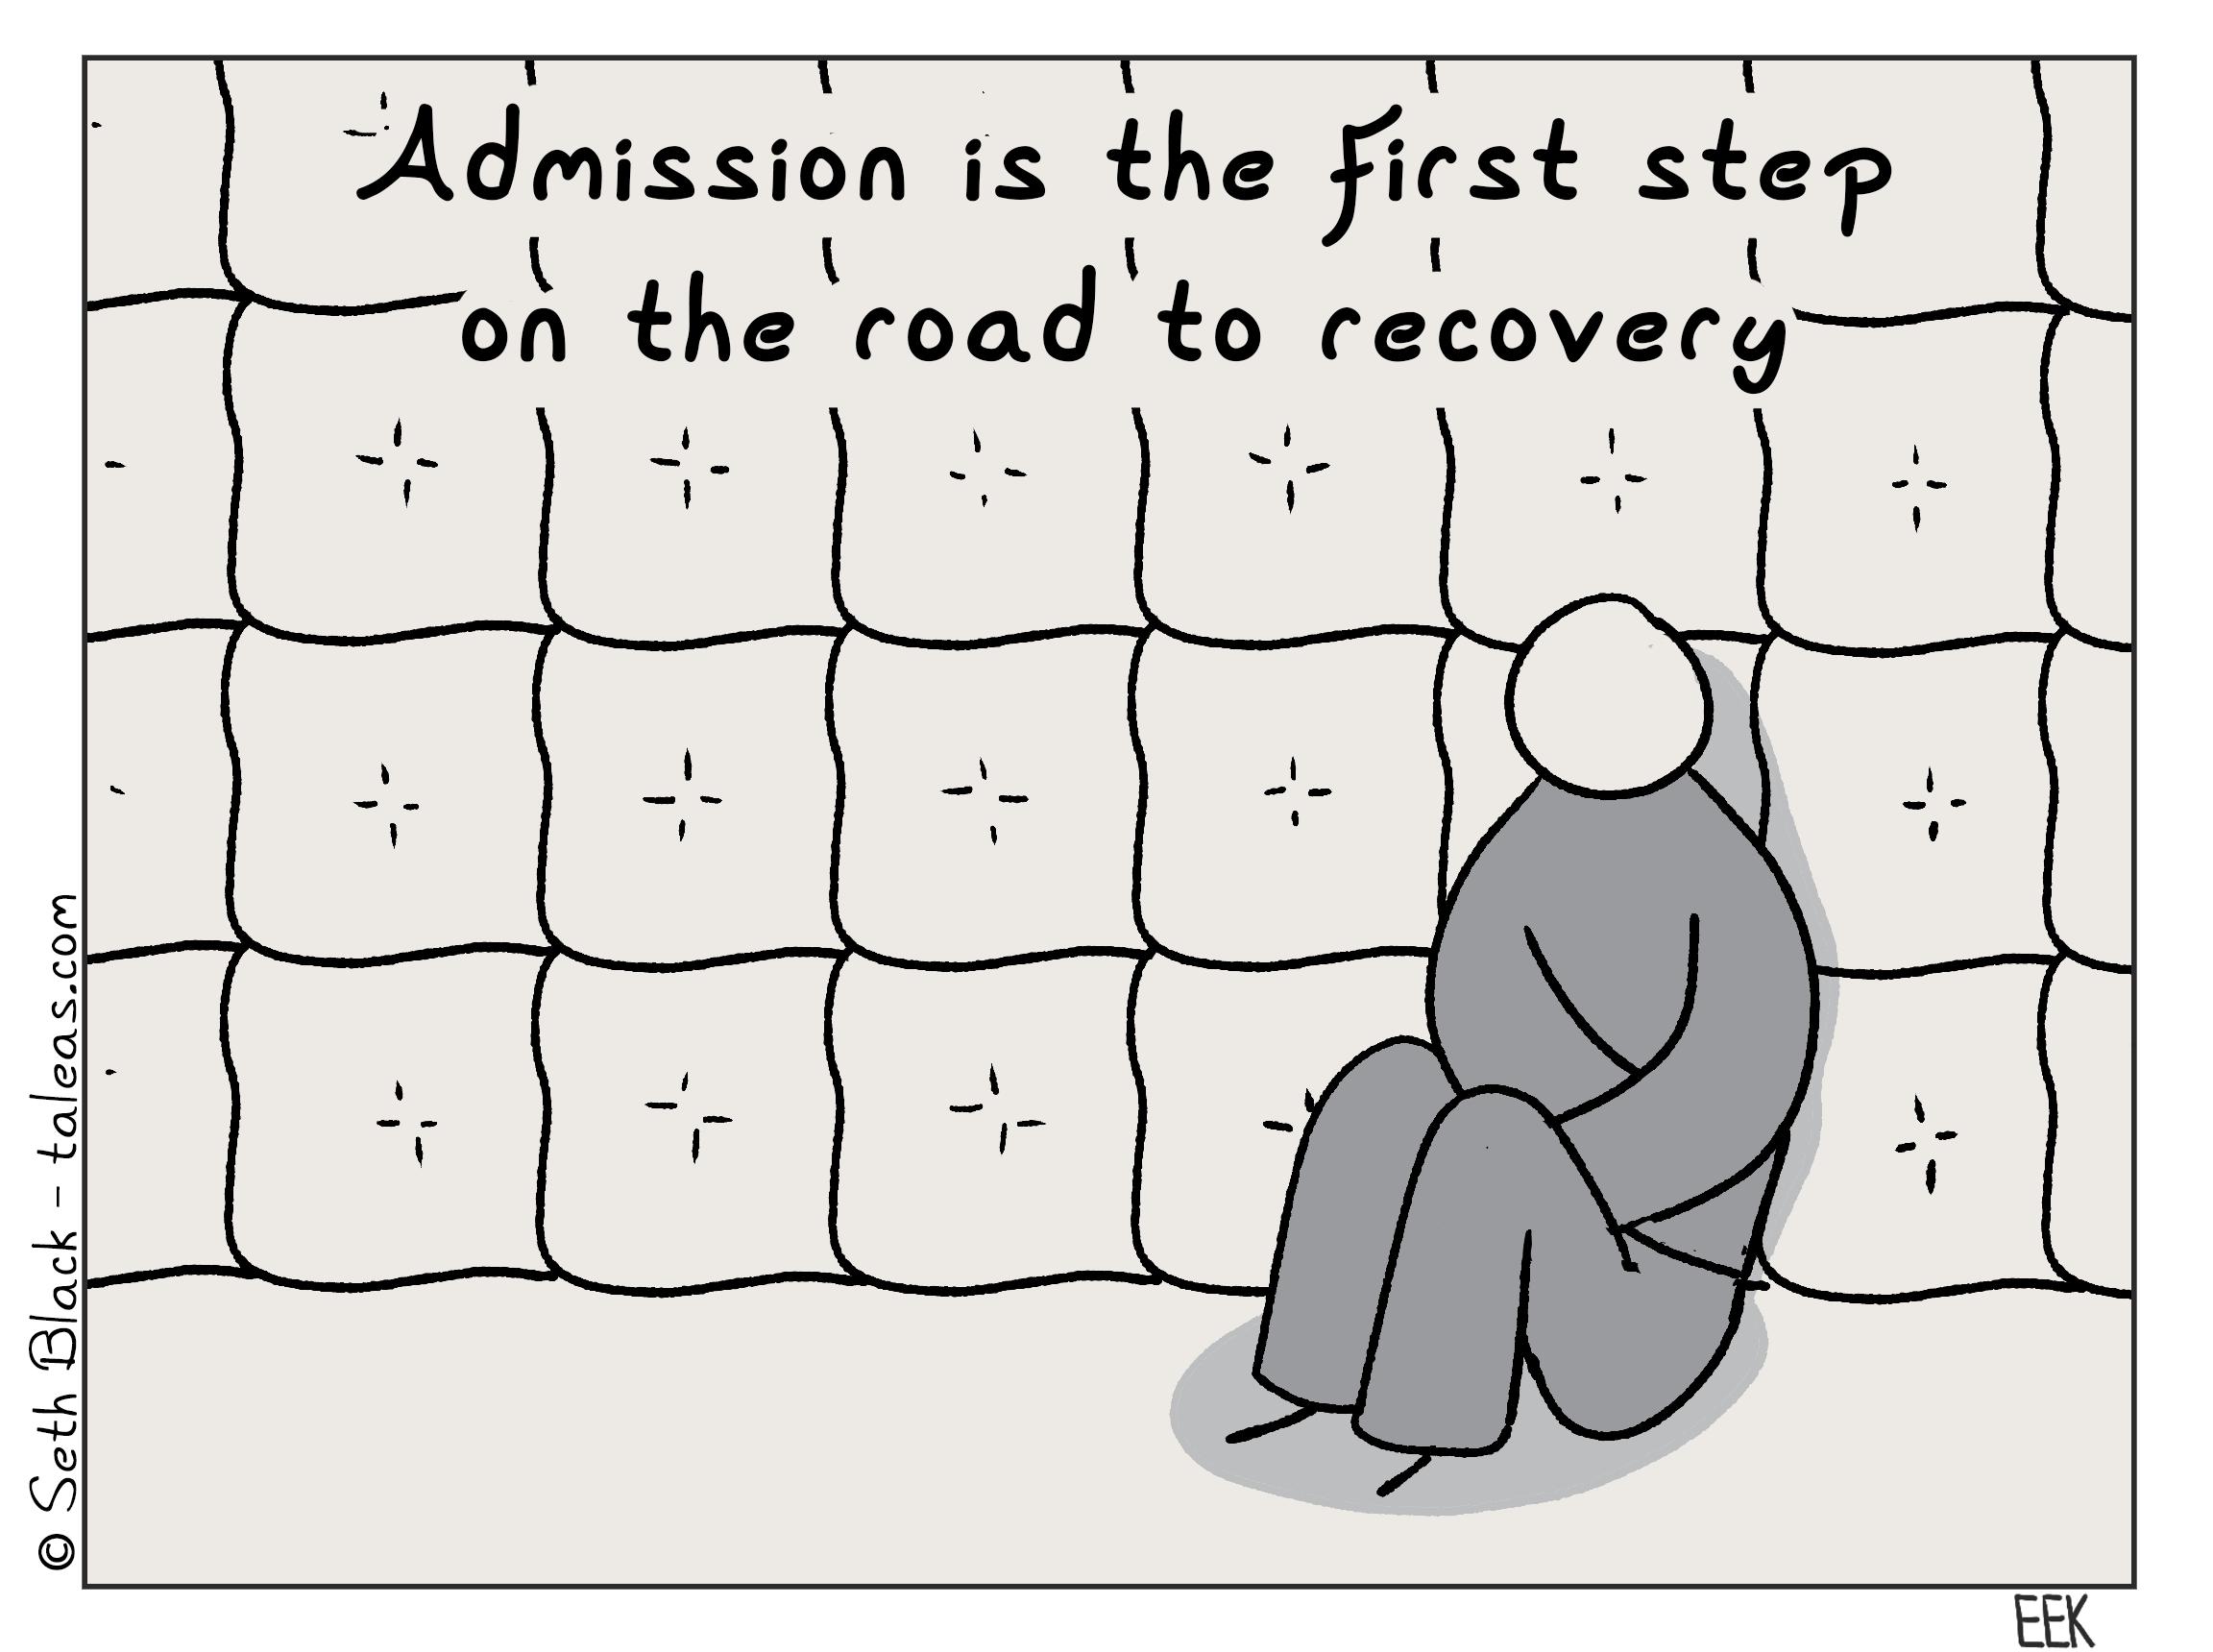 A person is in a padded jacket in a padded room. "Admission is the first step on the road to recovery."